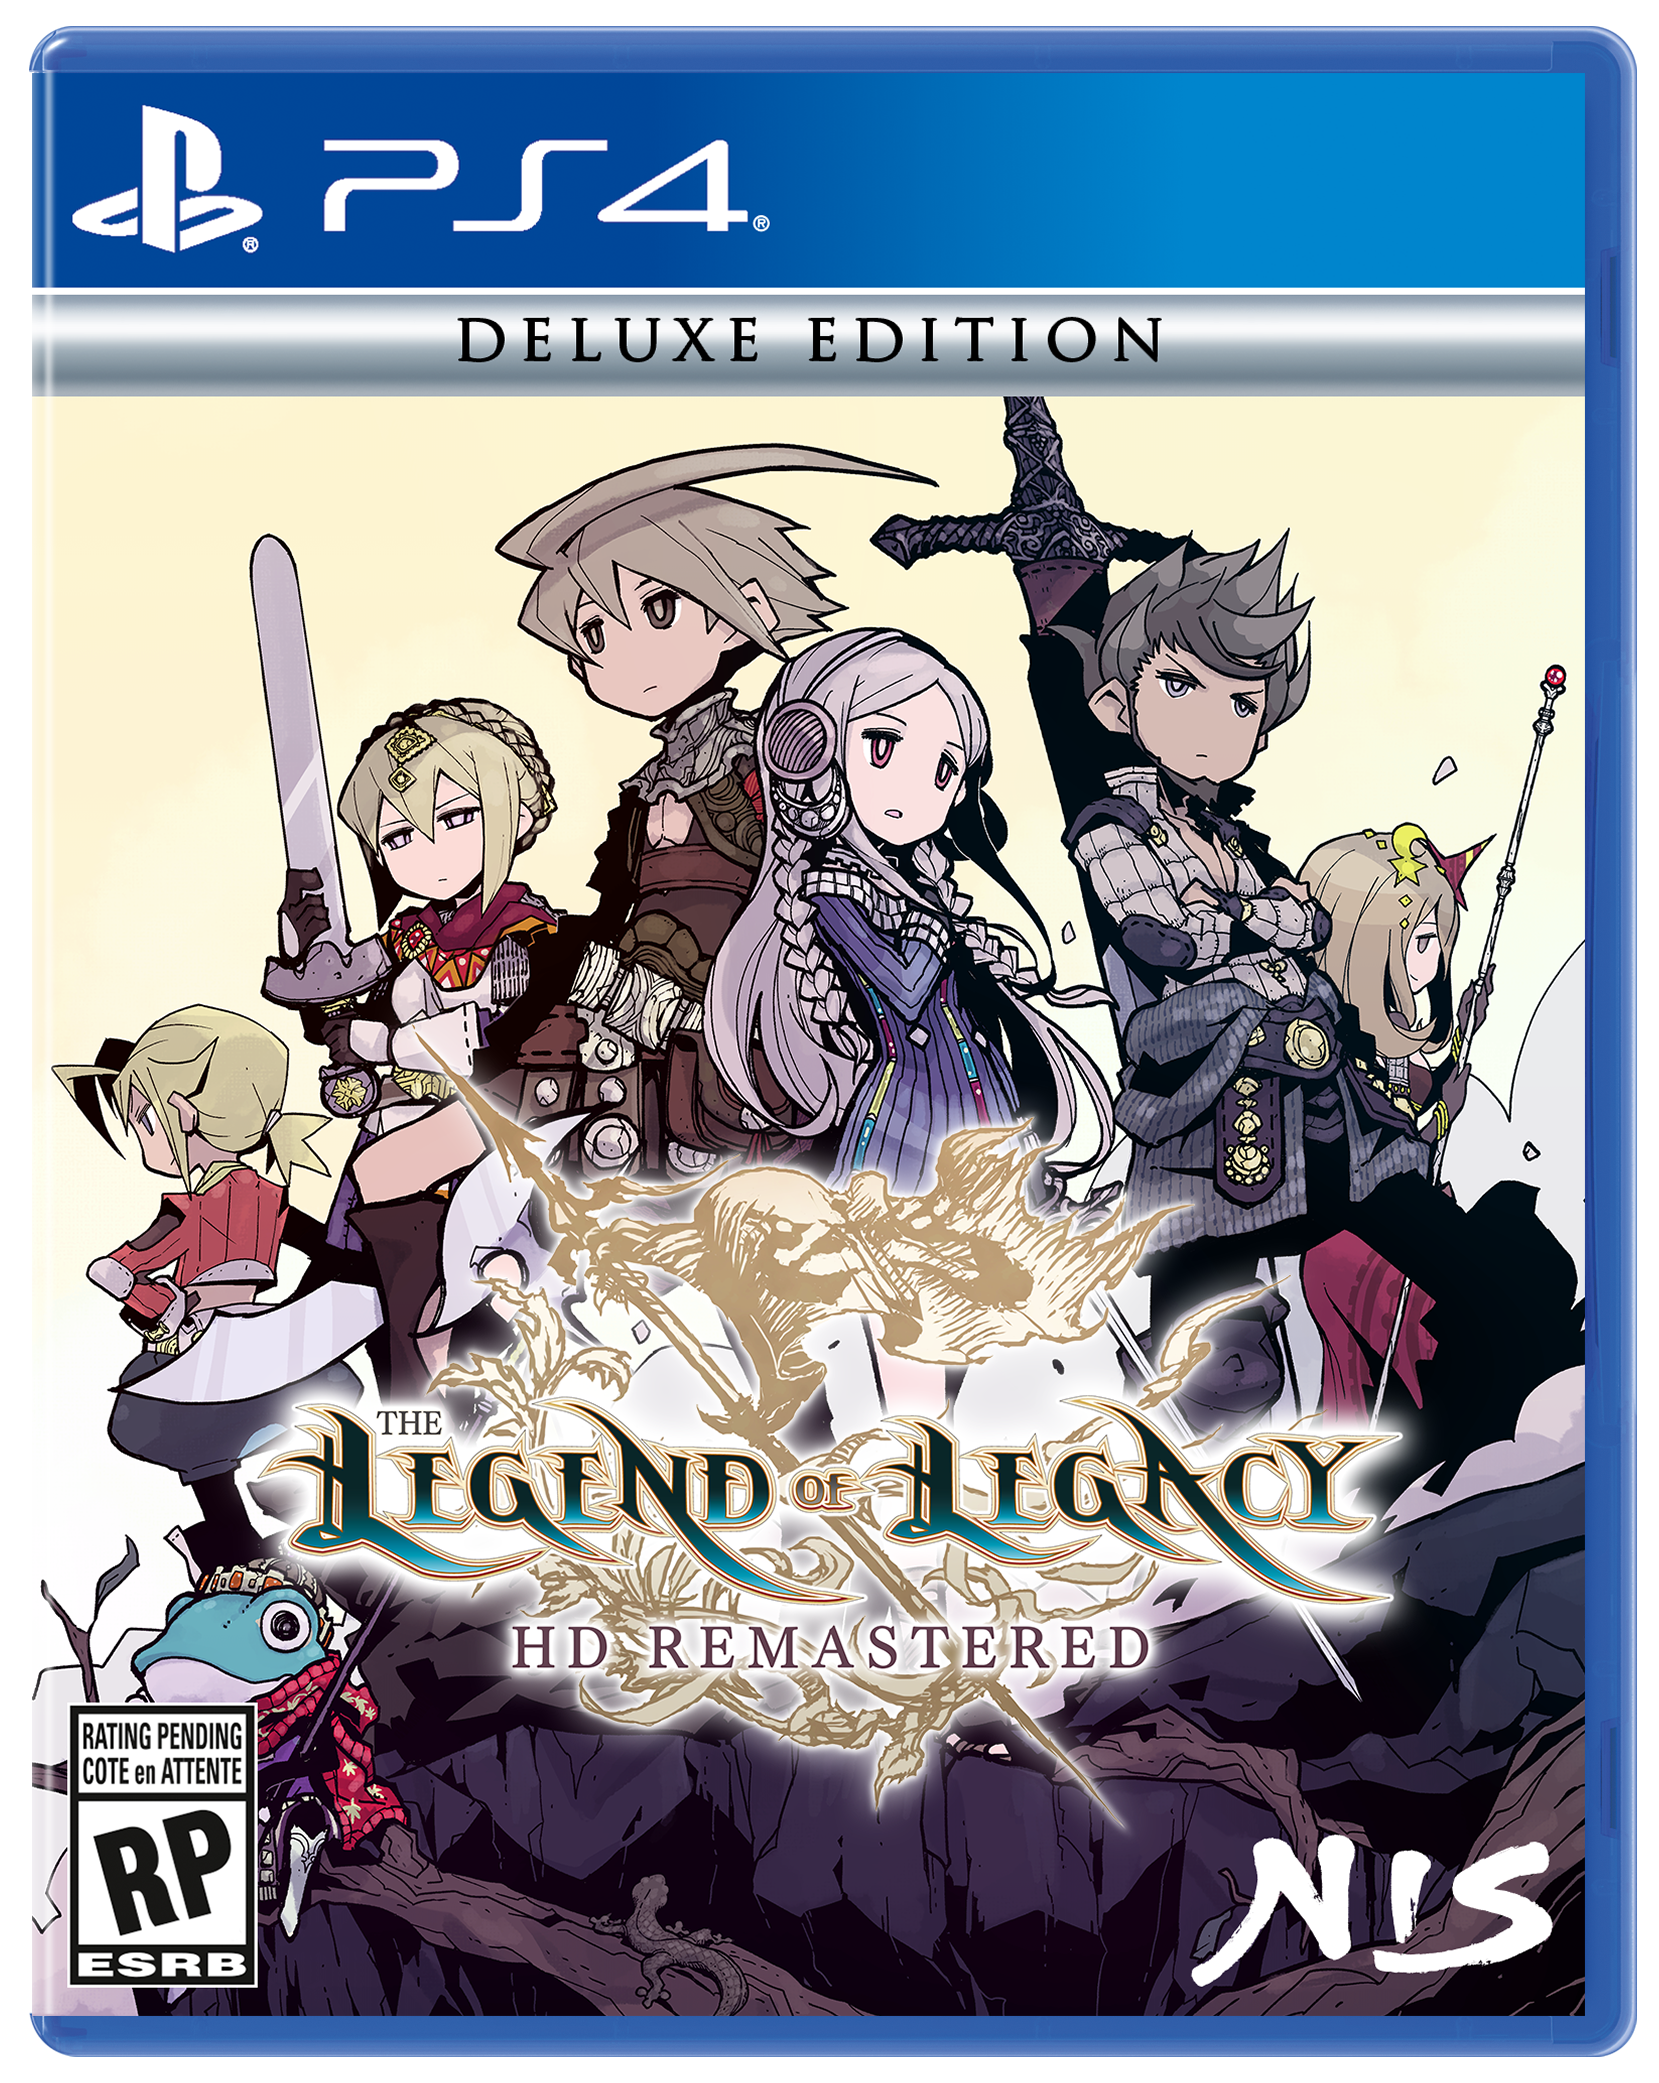 The Legend of Legacy HD Remastered Deluxe Edition - PlayStation 4